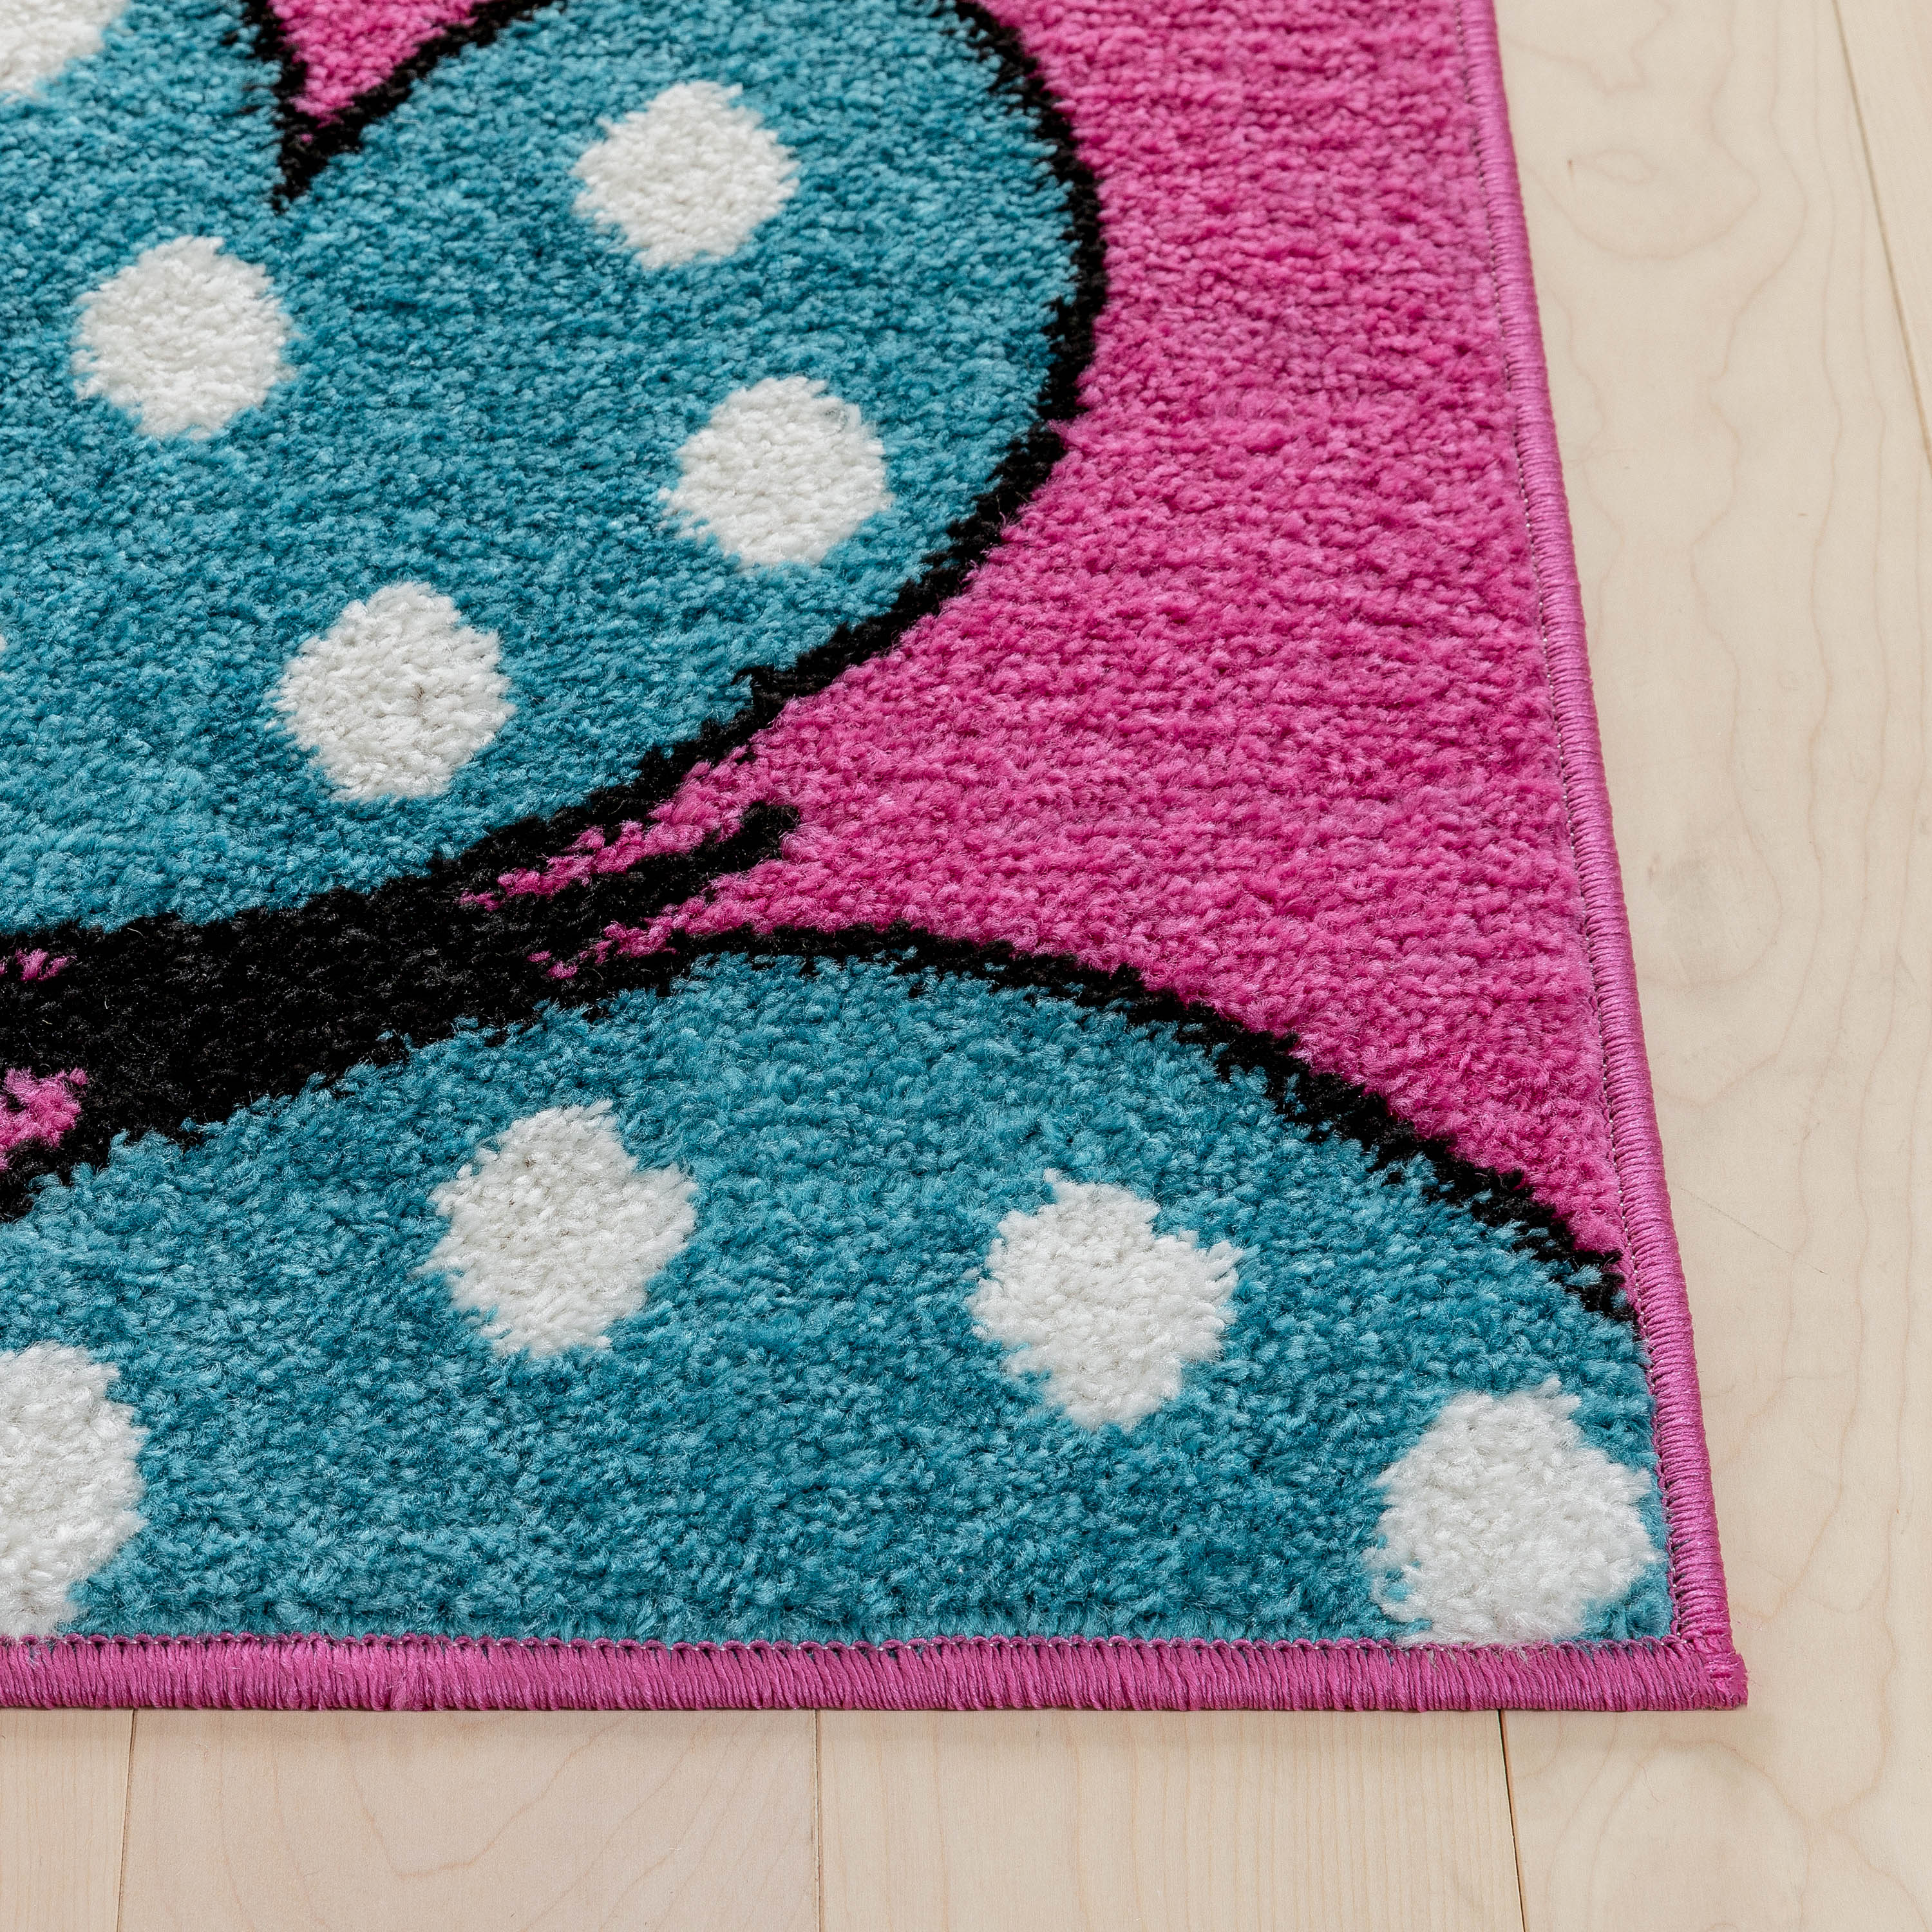 Well Woven Star Bright Daisy Butterflies Kids Area Rug - image 3 of 8